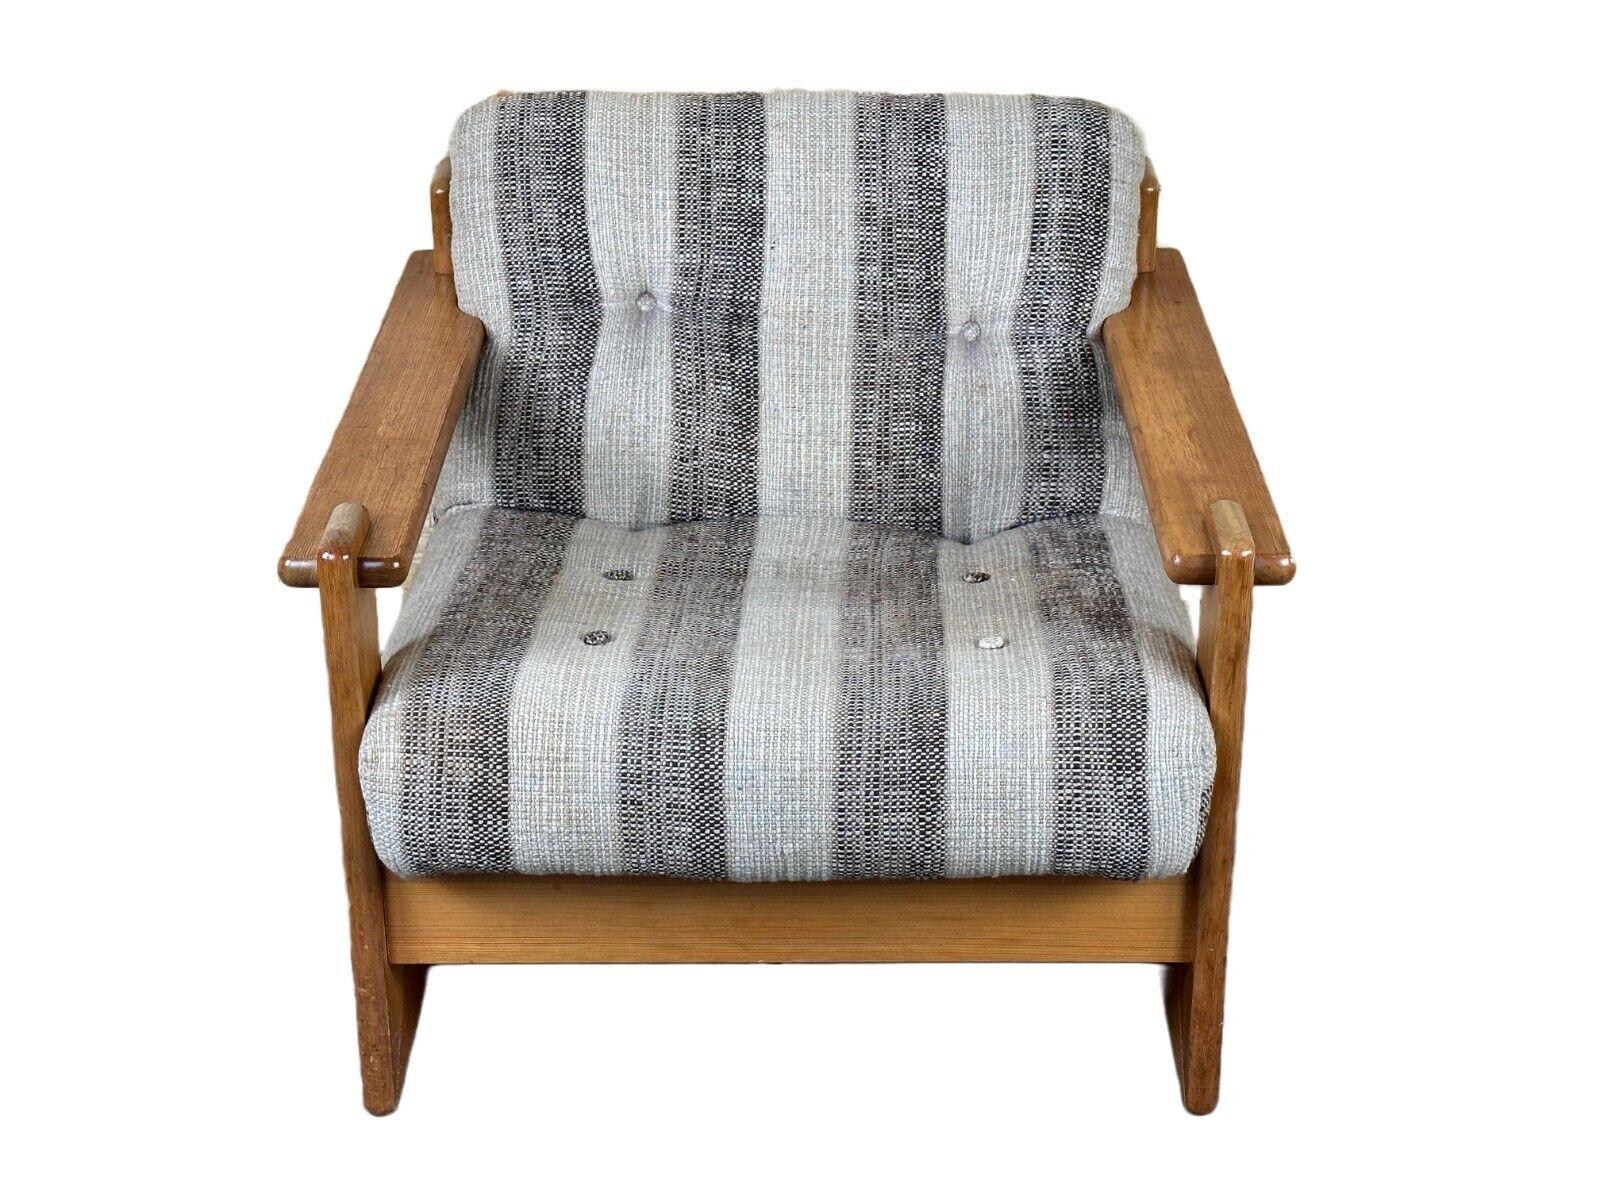 60s 70s pine easy chair lounge chair Danish Modern Design

Object: Easy Chair

Manufacturer:

Condition: good - vintage

Age: around 1960-1970

Dimensions:

Width = 78cm
Depth = 85cm
Height = 87cm
Seat height = 39cm

Other